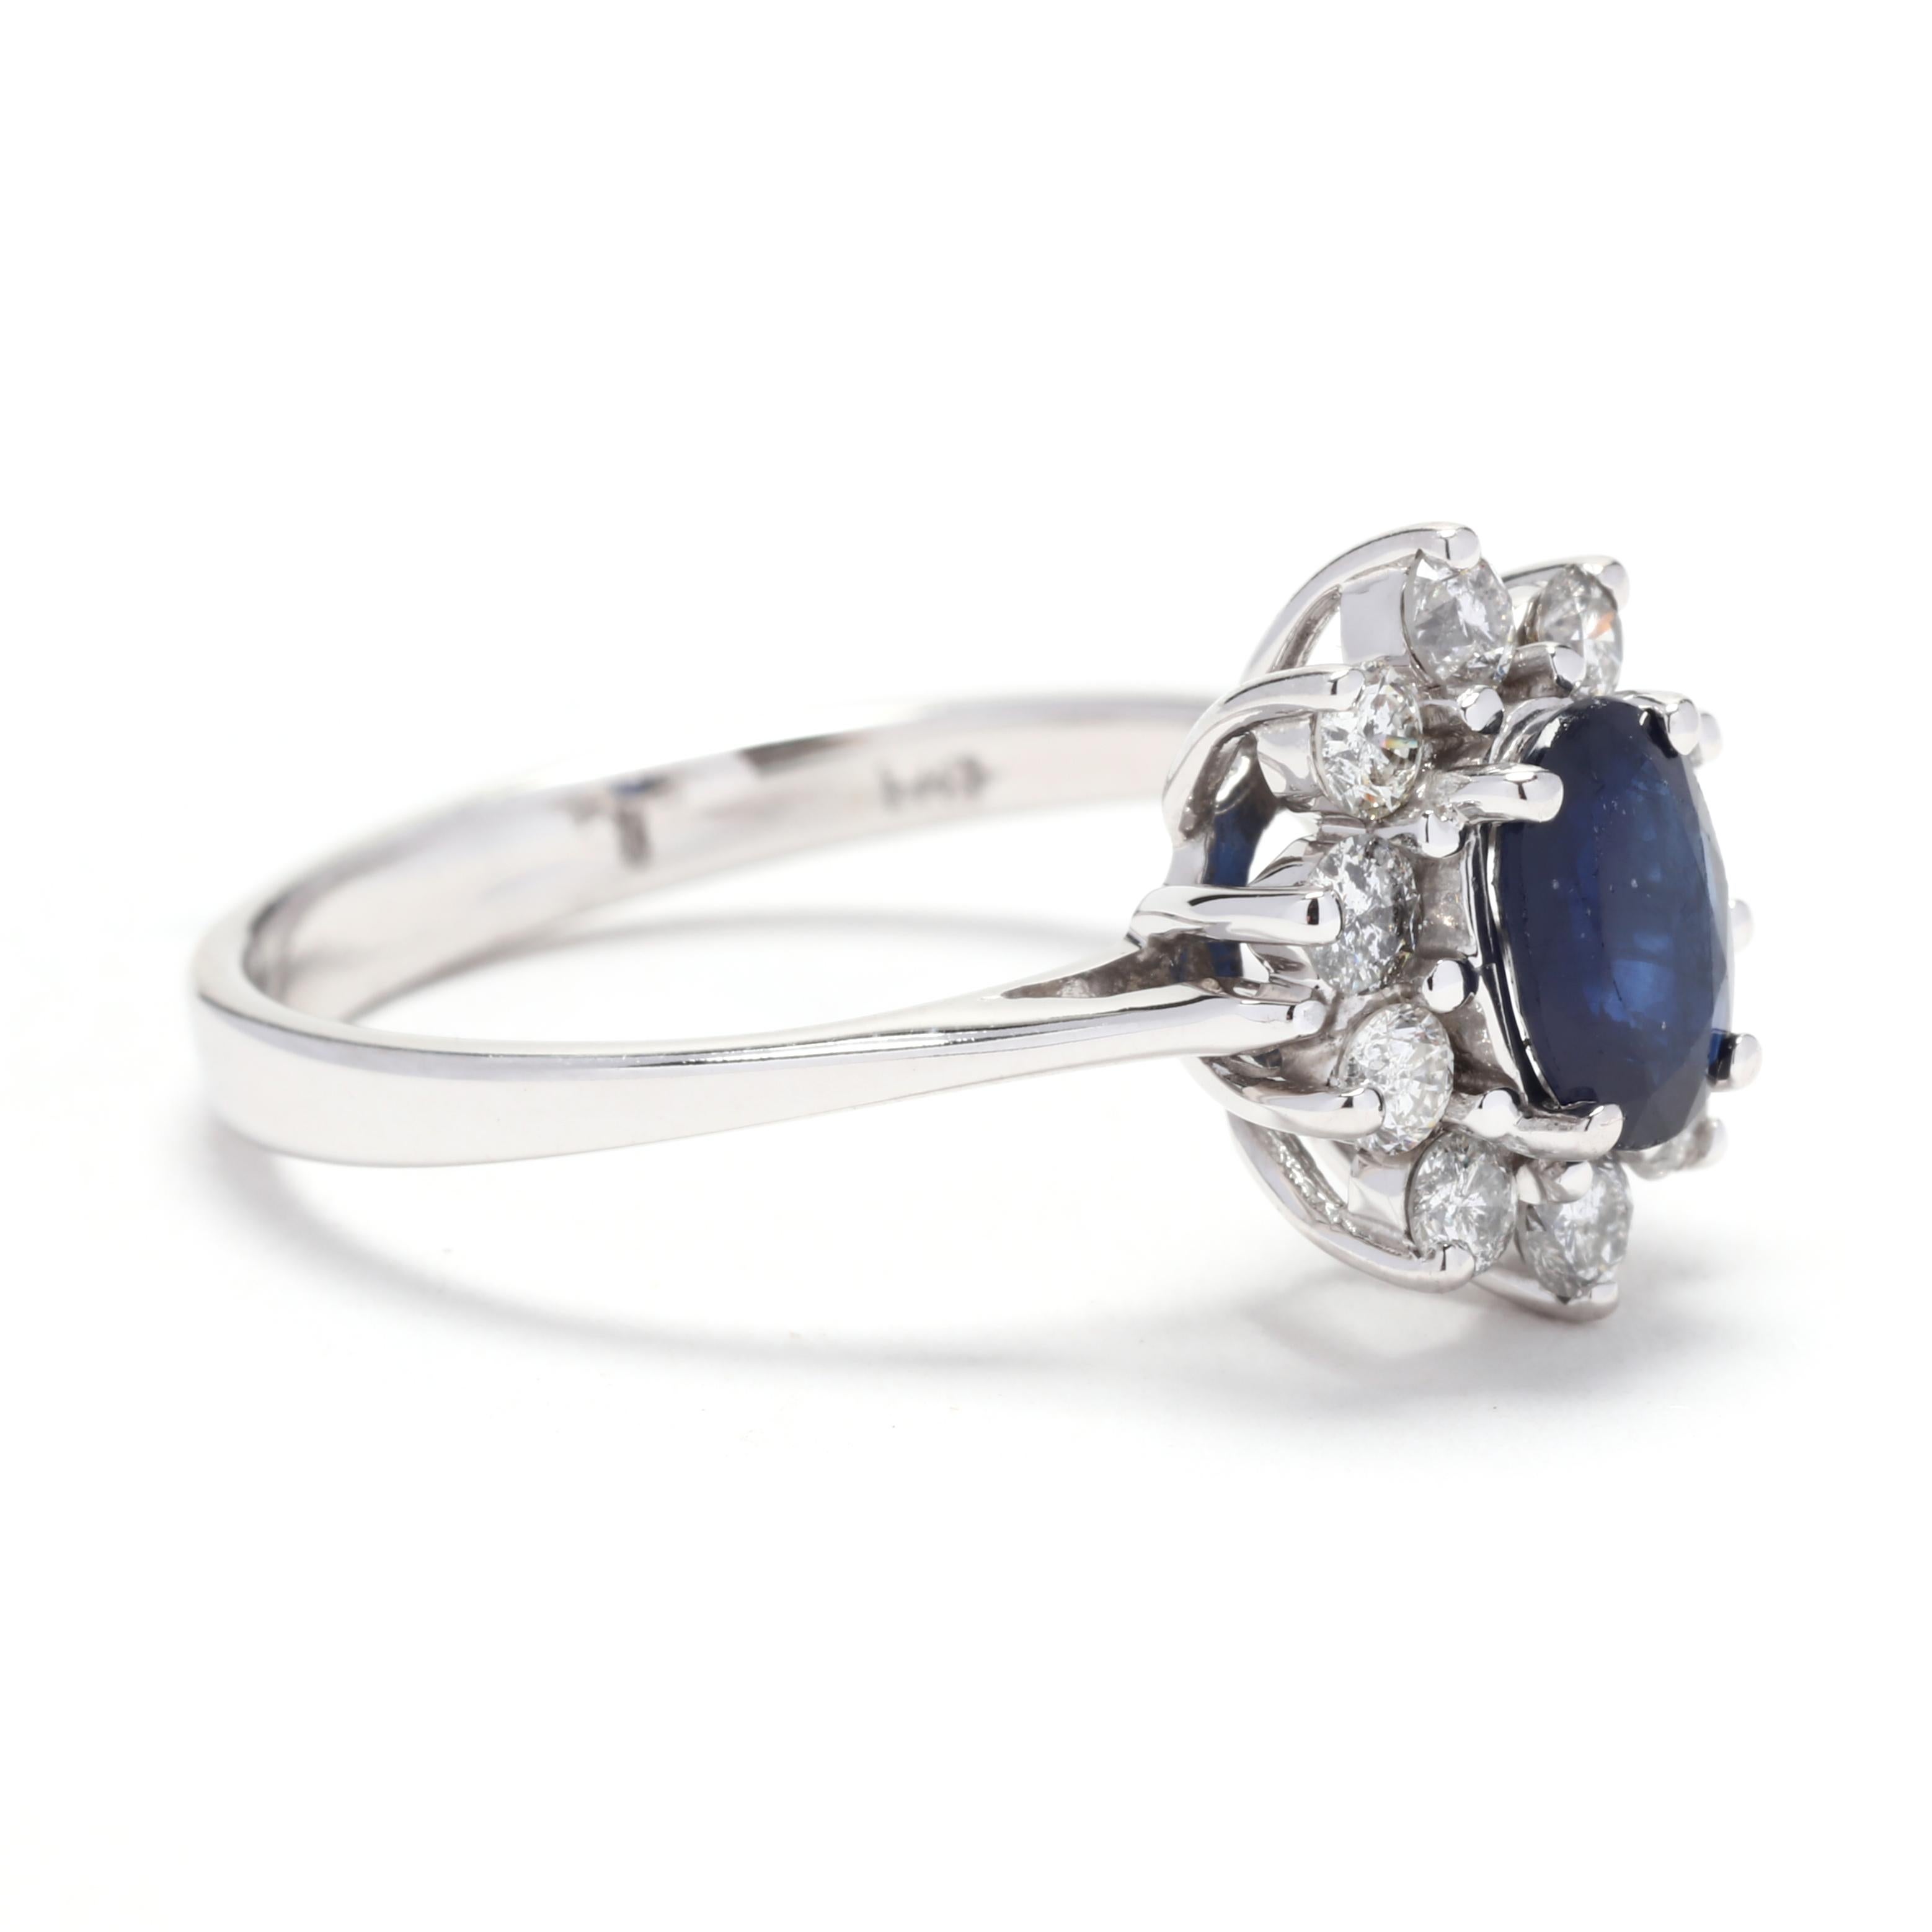 This stunning Oval Sapphire Diamond Halo Engagement Ring in 14K White Gold is a true statement piece. The centerpiece of this ring is a beautiful oval-cut sapphire, known for its deep and rich blue color. Surrounding the sapphire are sparkling